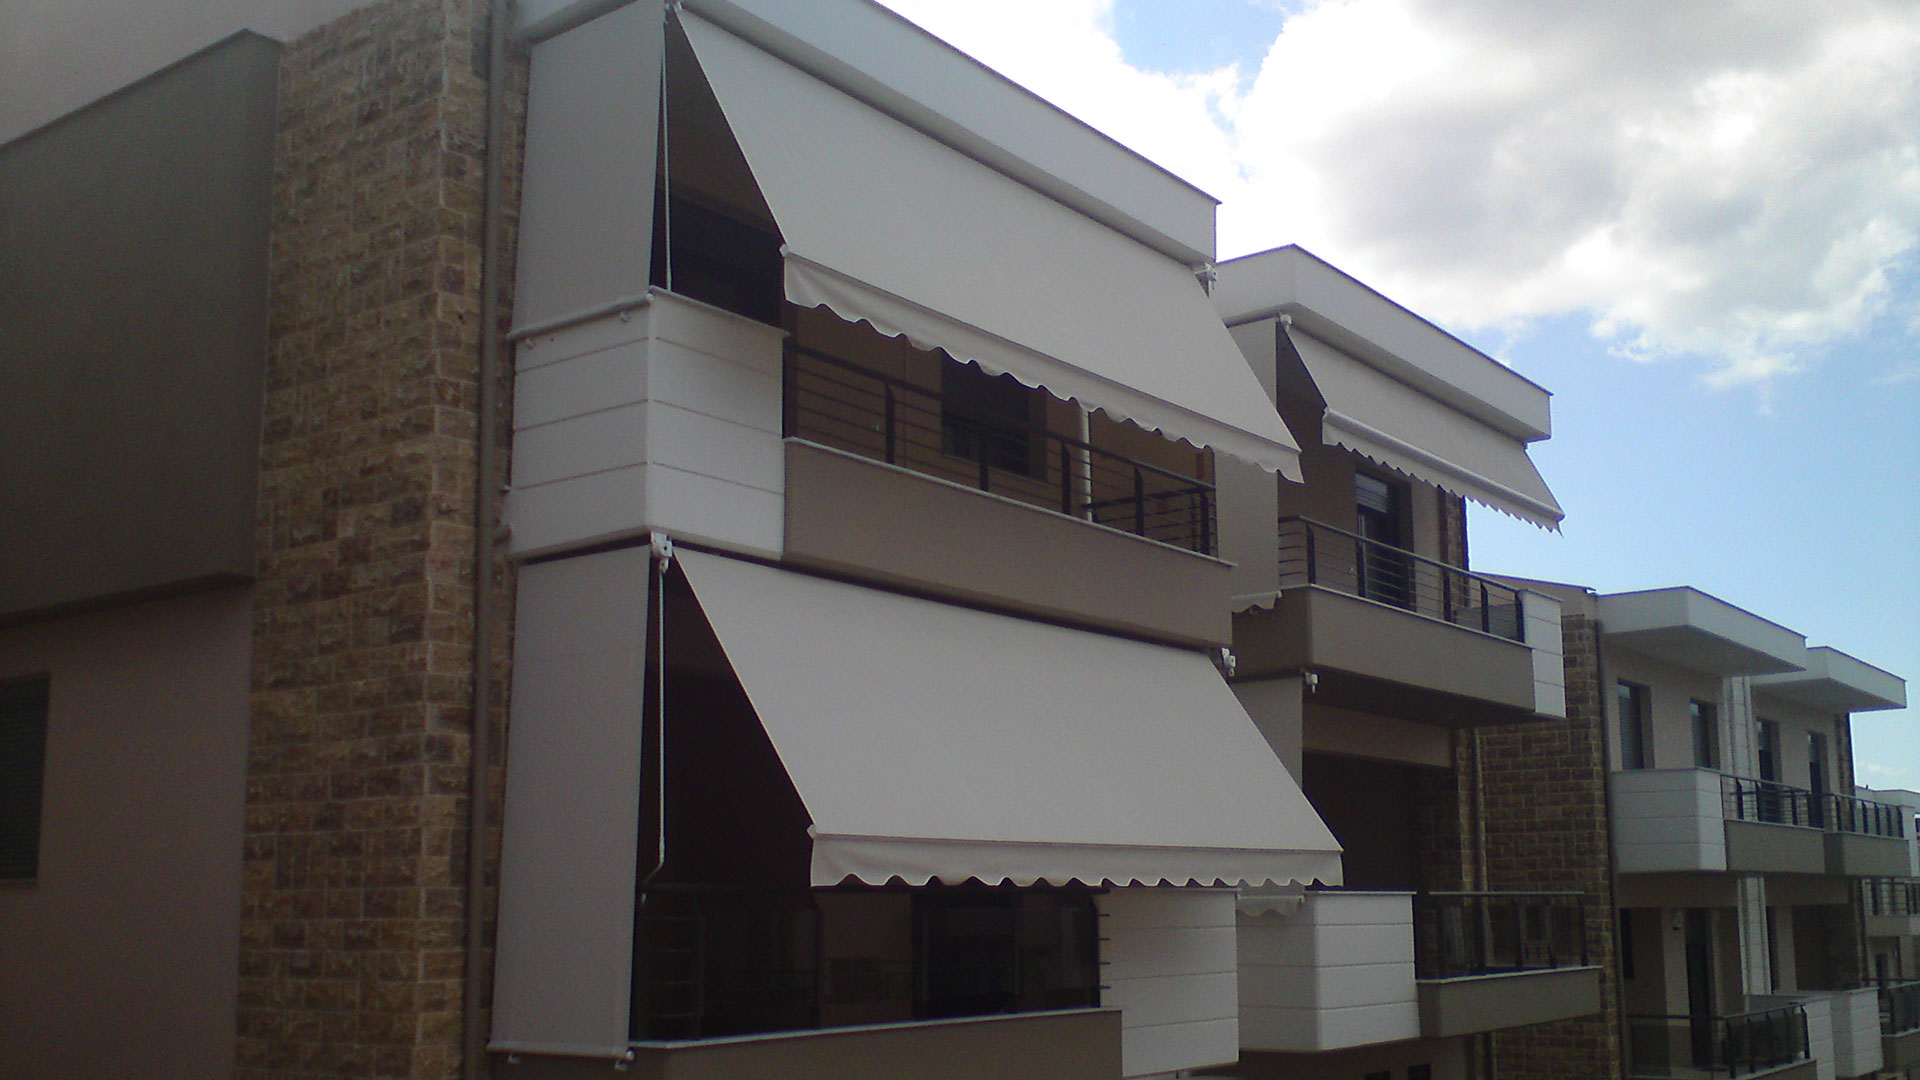 Side awnings